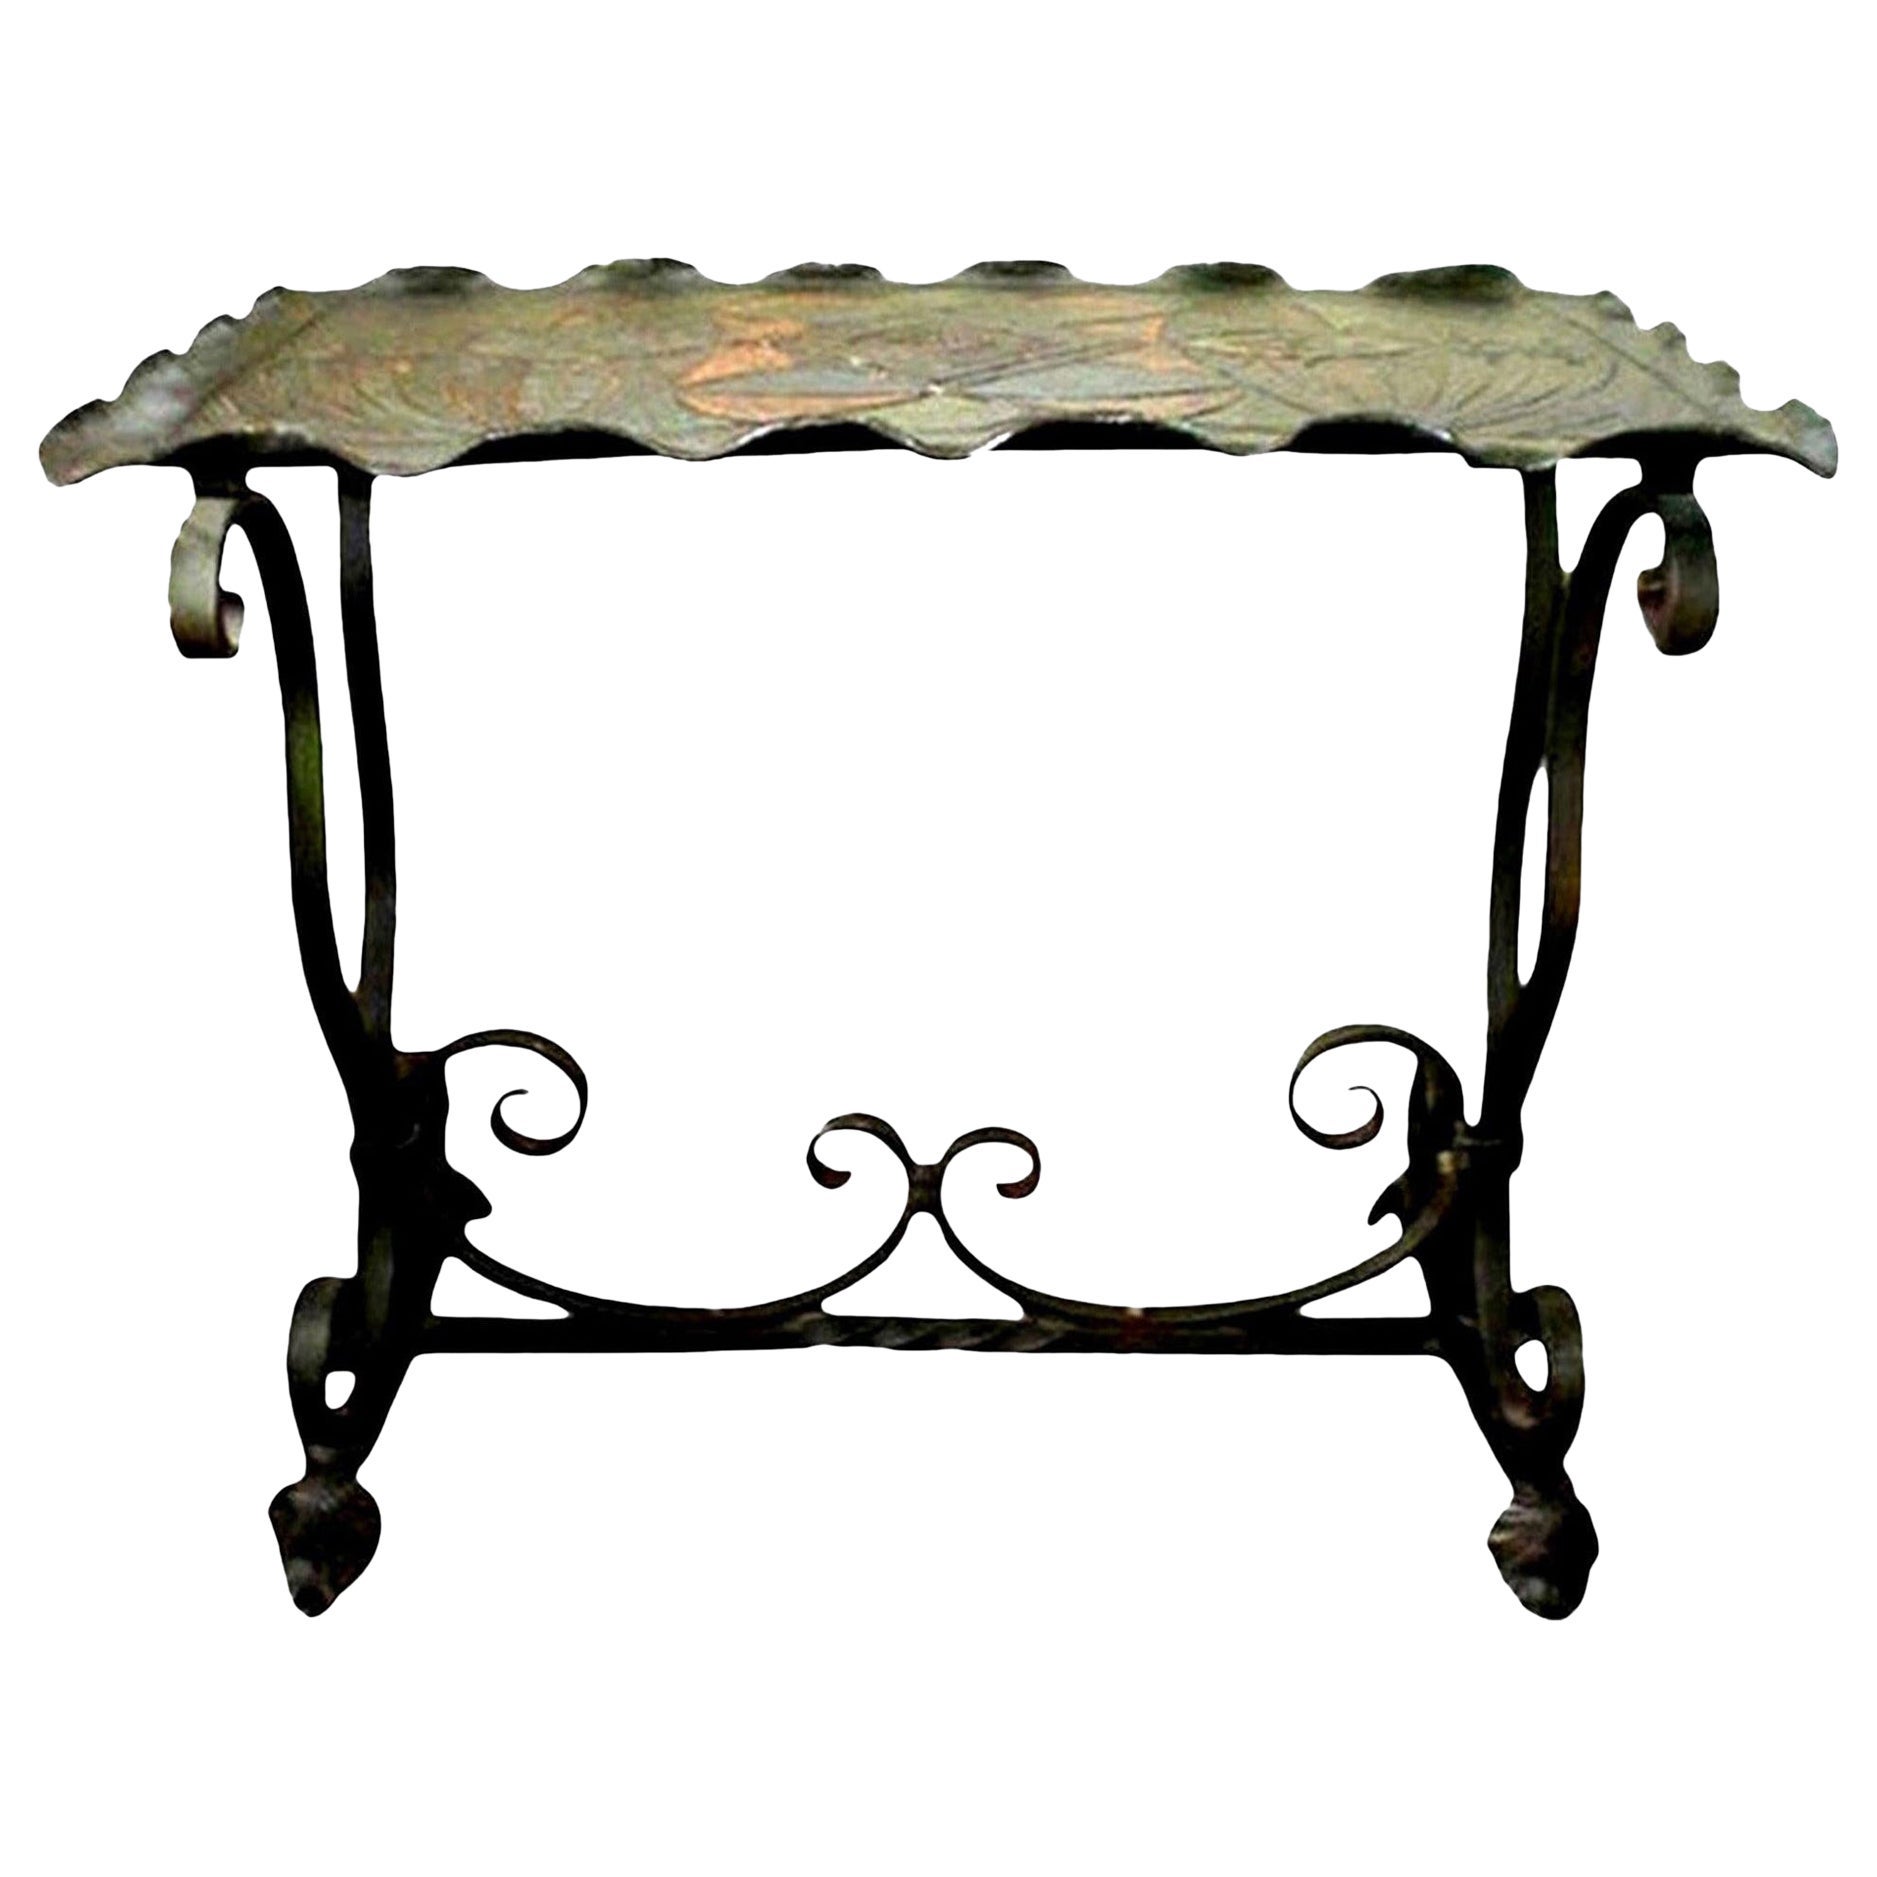 Addison Mizner Inspired Arts & Crafts Wrought Iron Tray-Top Table For Sale